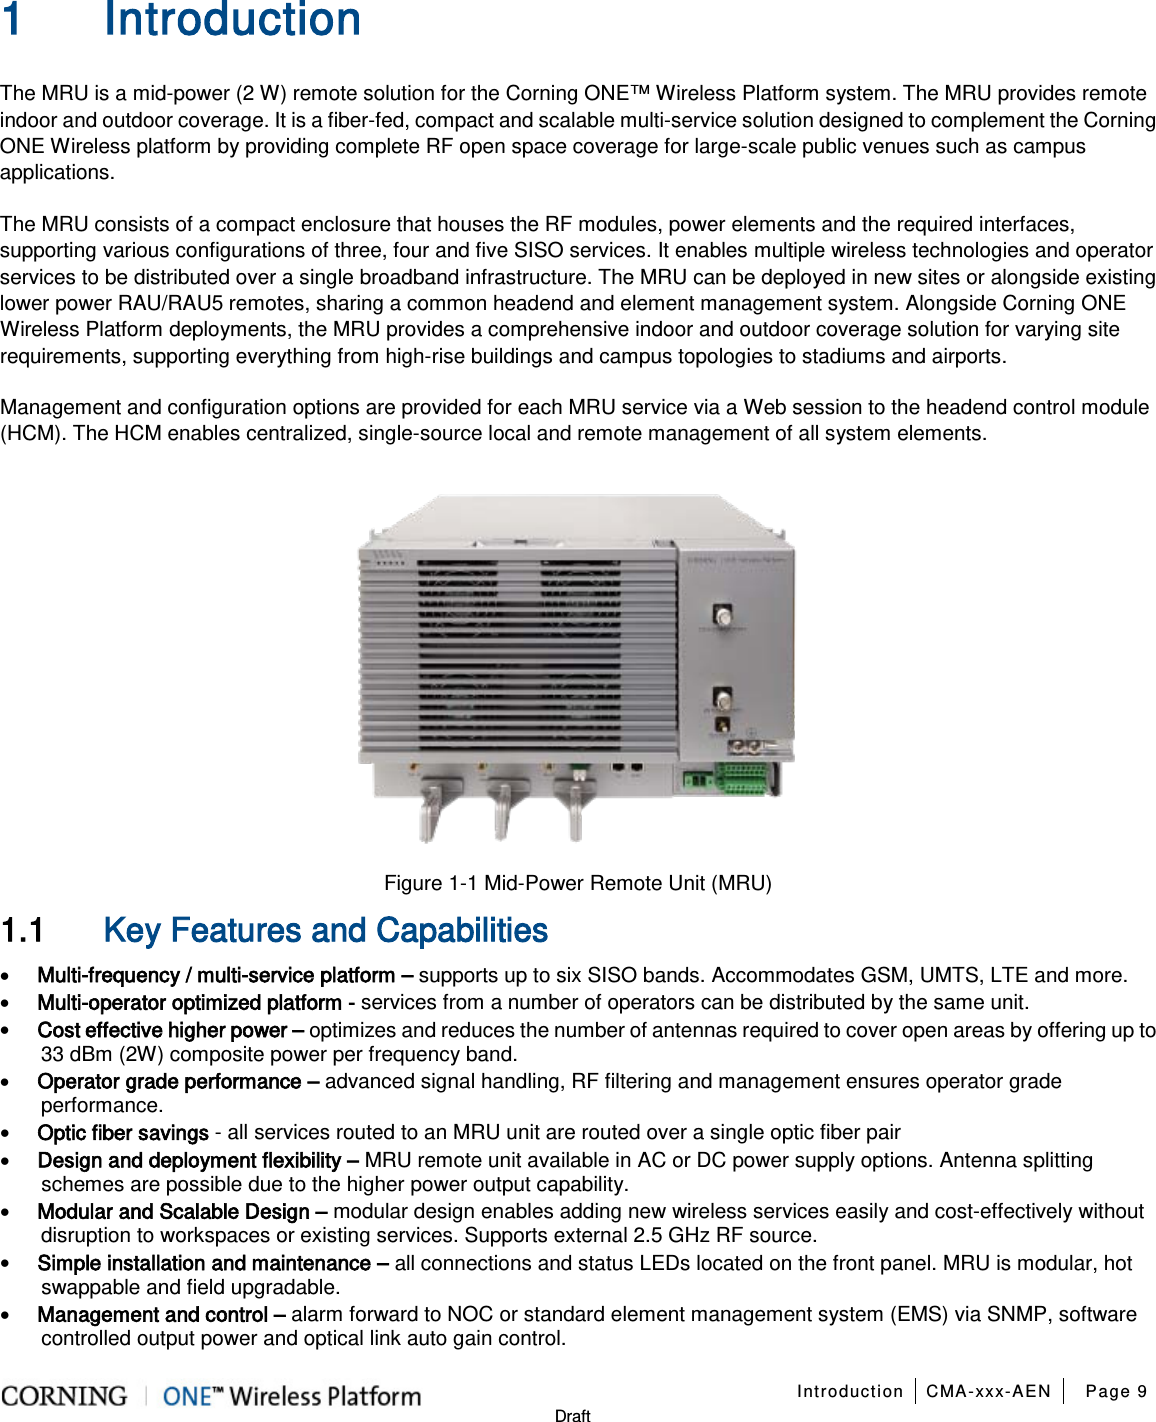   Introduction CMA-xxx-AEN Page 9   Draft 1 Introduction The MRU is a mid-power (2 W) remote solution for the Corning ONE™ Wireless Platform system. The MRU provides remote indoor and outdoor coverage. It is a fiber-fed, compact and scalable multi-service solution designed to complement the Corning ONE Wireless platform by providing complete RF open space coverage for large-scale public venues such as campus applications. The MRU consists of a compact enclosure that houses the RF modules, power elements and the required interfaces, supporting various configurations of three, four and five SISO services. It enables multiple wireless technologies and operator services to be distributed over a single broadband infrastructure. The MRU can be deployed in new sites or alongside existing lower power RAU/RAU5 remotes, sharing a common headend and element management system. Alongside Corning ONE Wireless Platform deployments, the MRU provides a comprehensive indoor and outdoor coverage solution for varying site requirements, supporting everything from high-rise buildings and campus topologies to stadiums and airports. Management and configuration options are provided for each MRU service via a Web session to the headend control module (HCM). The HCM enables centralized, single-source local and remote management of all system elements.  Figure  1-1 Mid-Power Remote Unit (MRU) 1.1 Key Features and Capabilities • Multi-frequency / multi-service platform – supports up to six SISO bands. Accommodates GSM, UMTS, LTE and more. • Multi-operator optimized platform - services from a number of operators can be distributed by the same unit. • Cost effective higher power – optimizes and reduces the number of antennas required to cover open areas by offering up to 33 dBm (2W) composite power per frequency band. • Operator grade performance – advanced signal handling, RF filtering and management ensures operator grade performance. • Optic fiber savings - all services routed to an MRU unit are routed over a single optic fiber pair • Design and deployment flexibility – MRU remote unit available in AC or DC power supply options. Antenna splitting schemes are possible due to the higher power output capability. • Modular and Scalable Design – modular design enables adding new wireless services easily and cost-effectively without disruption to workspaces or existing services. Supports external 2.5 GHz RF source. • Simple installation and maintenance – all connections and status LEDs located on the front panel. MRU is modular, hot swappable and field upgradable. • Management and control – alarm forward to NOC or standard element management system (EMS) via SNMP, software controlled output power and optical link auto gain control.  